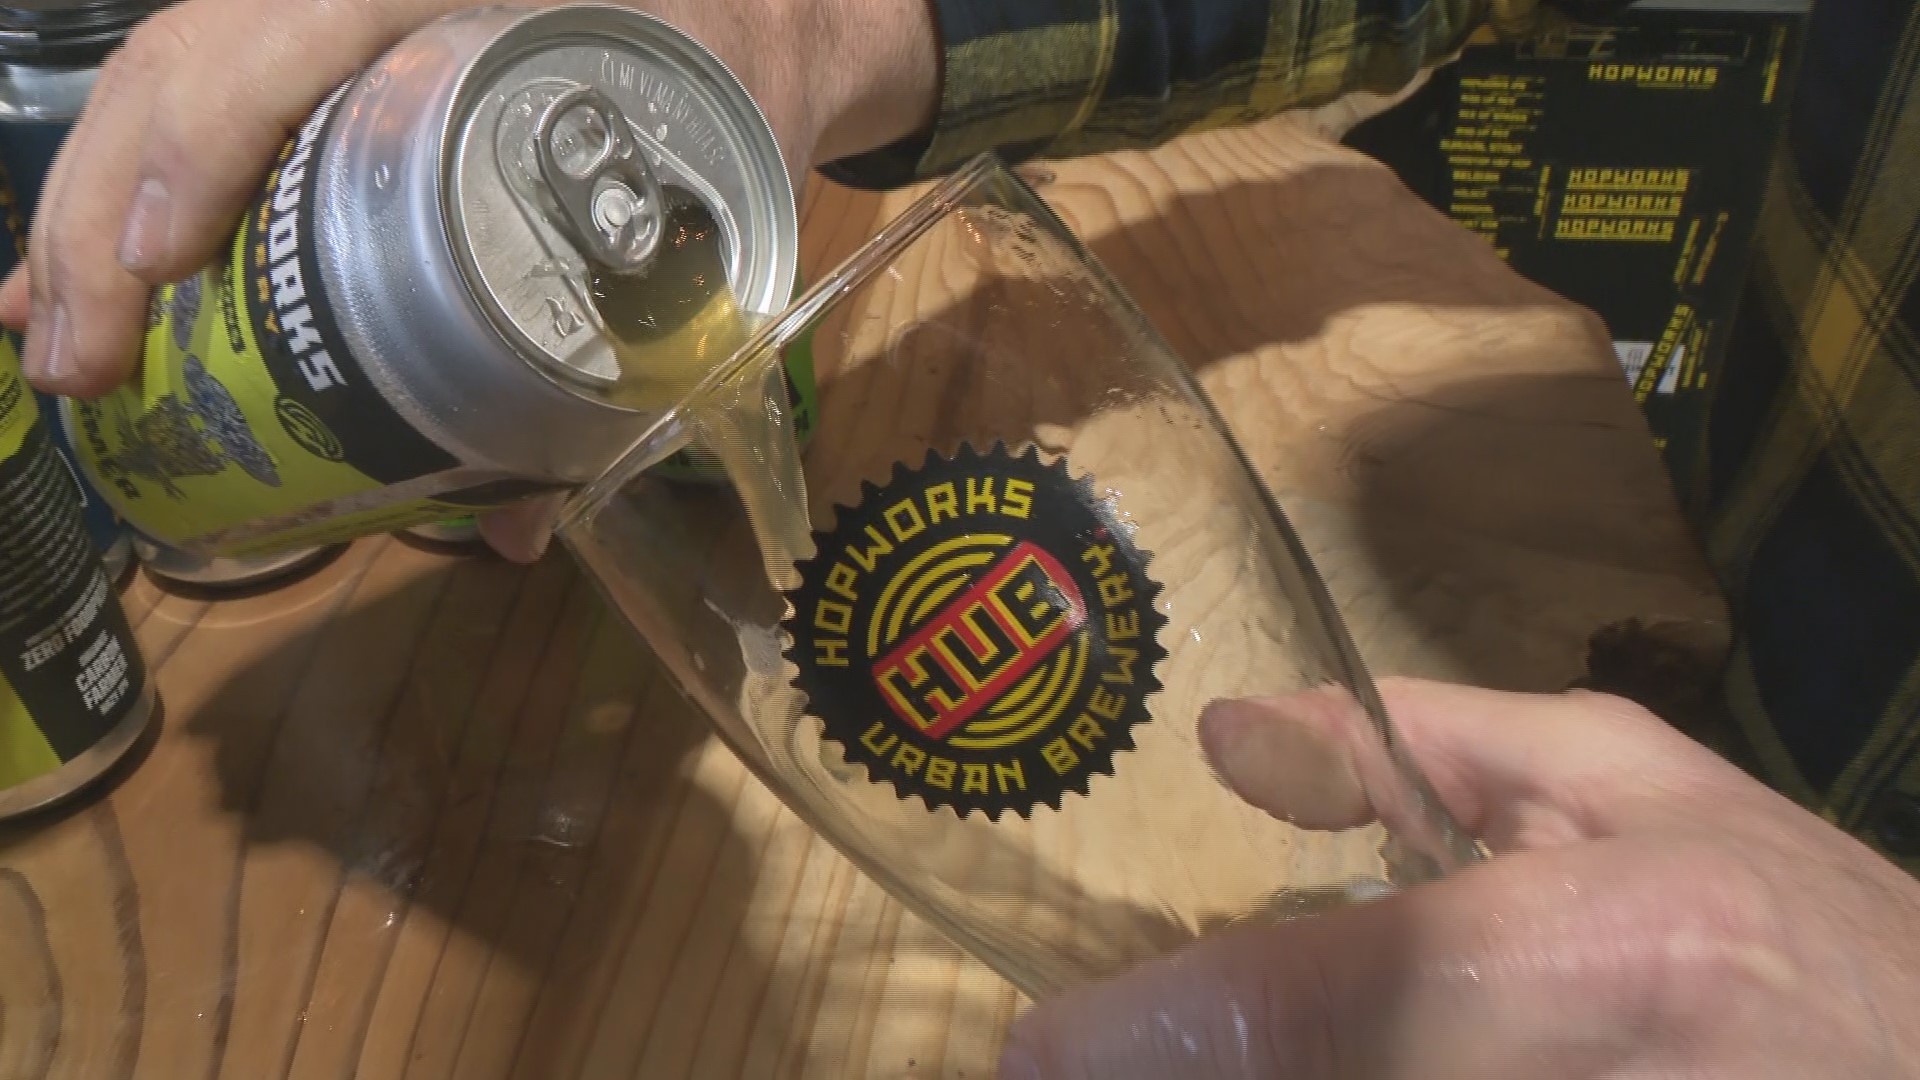 Southeast Portland's Hopworks Brewery created a special beer in honor of Earth Day. The Carbon-Farmer Hazy IPA uses a special gran that helps improve soil health.